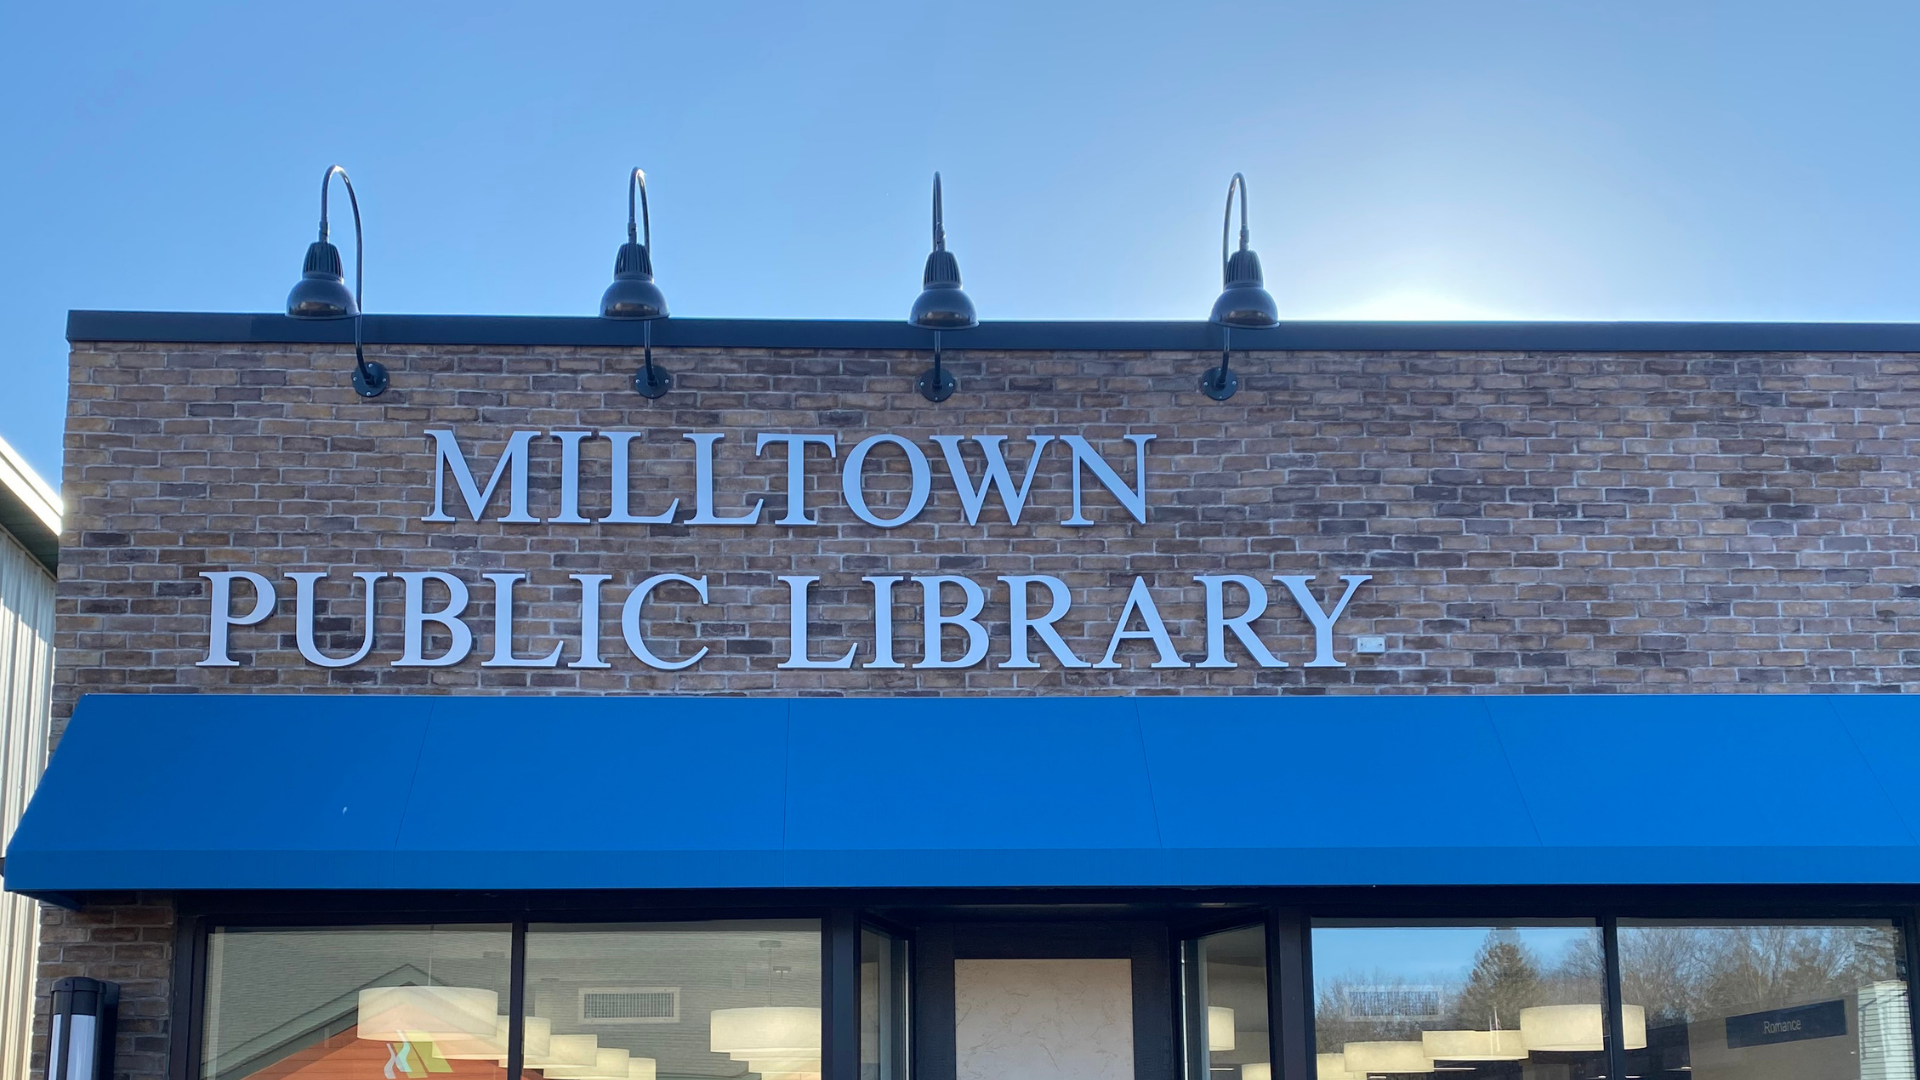 Outside of the Milltown Public Library Building